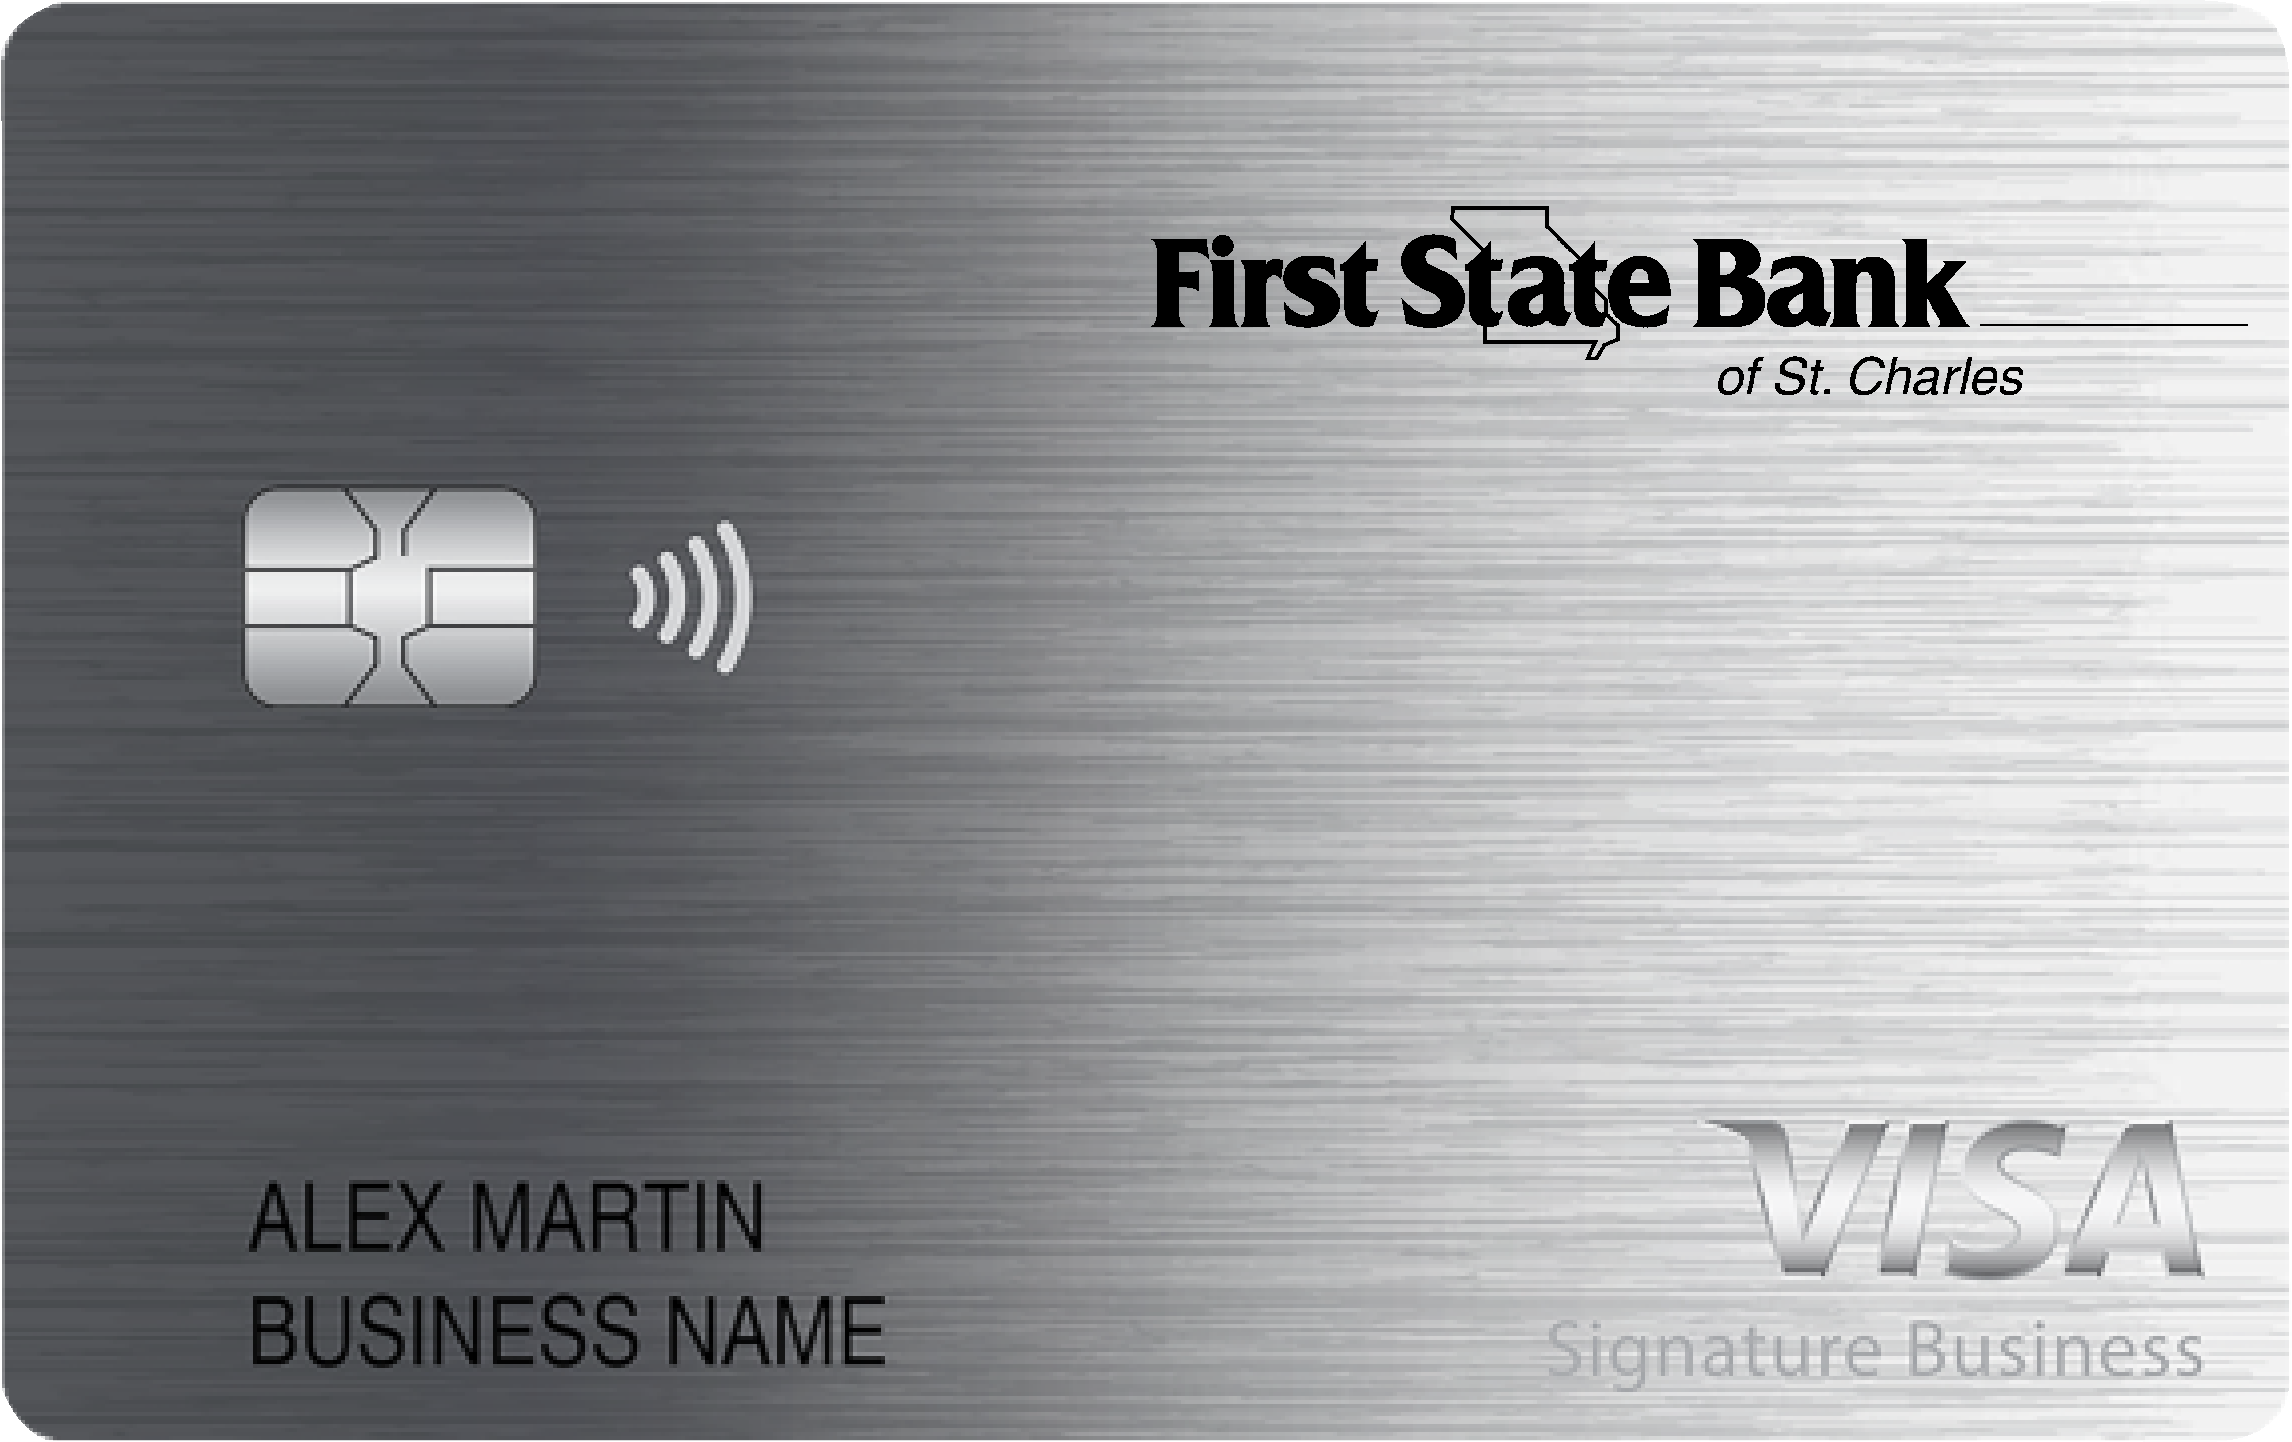 First State Bank of St Charles Smart Business Rewards Card